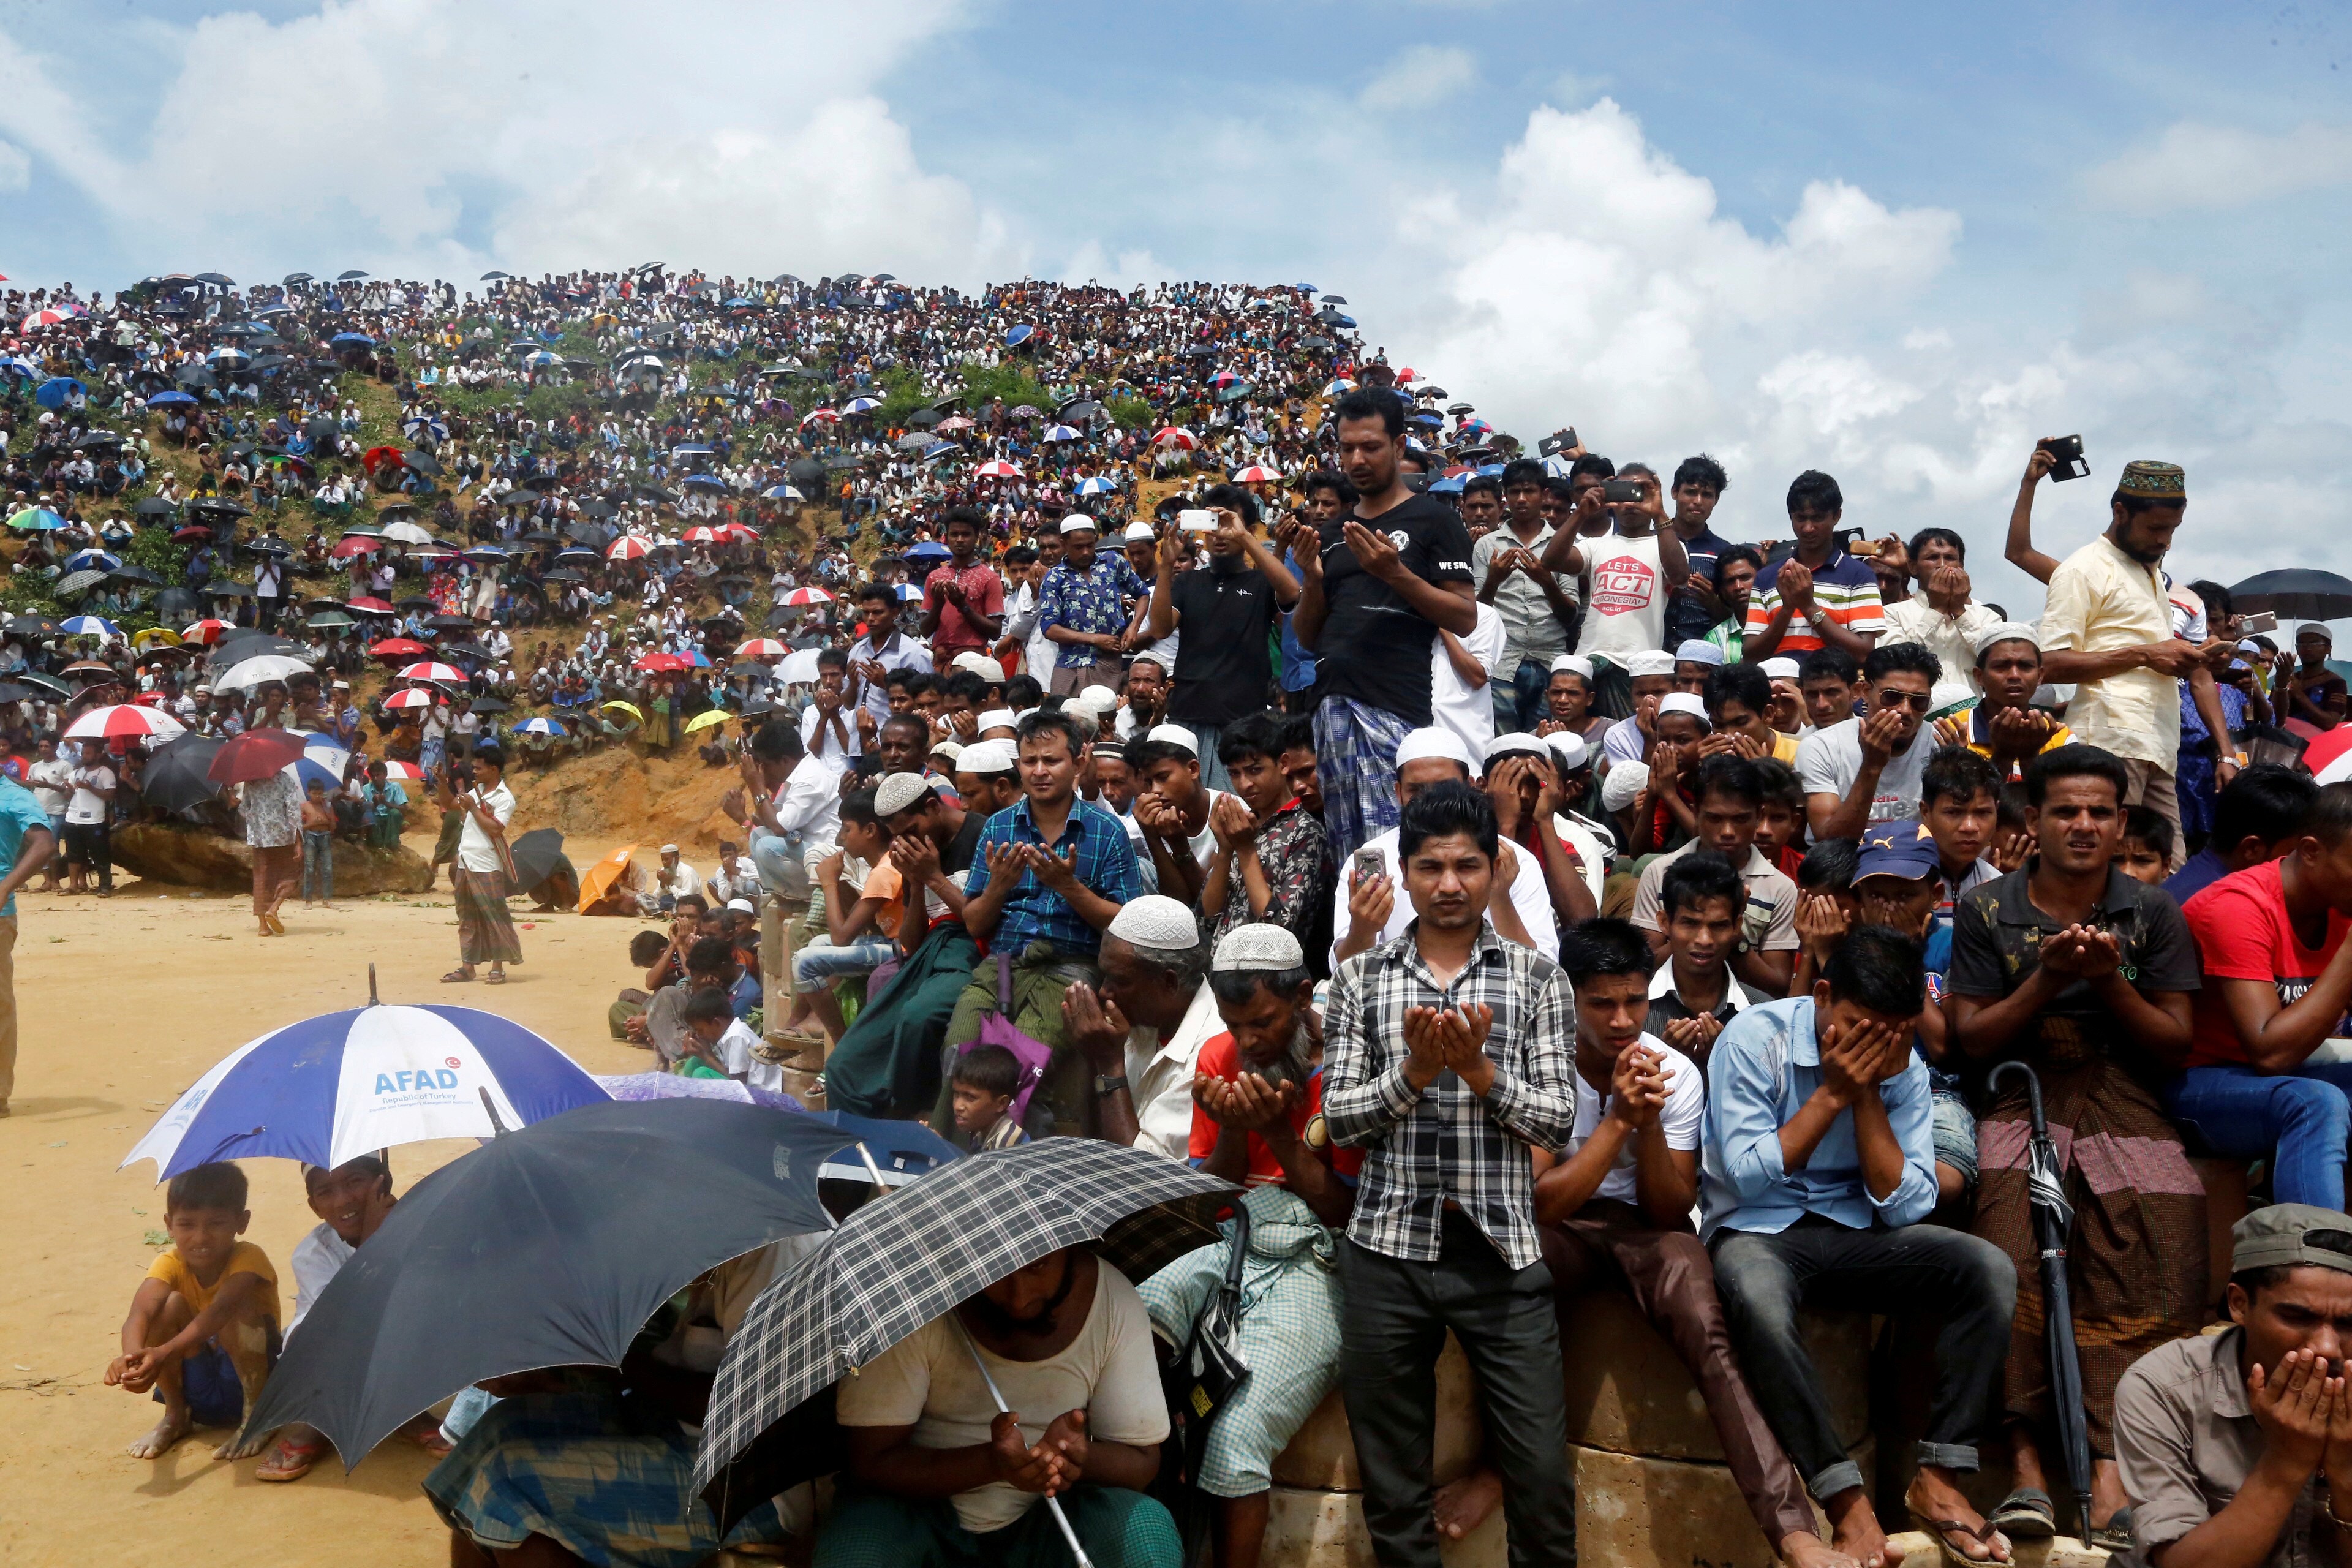 Rohingya refugees are seen in a camp in Bangladesh. The International Court of Justice on Thursday ordered Myanmar to take urgent measures to protect its Rohingya Muslim population from persecution and atrocities. Photo: Reuters